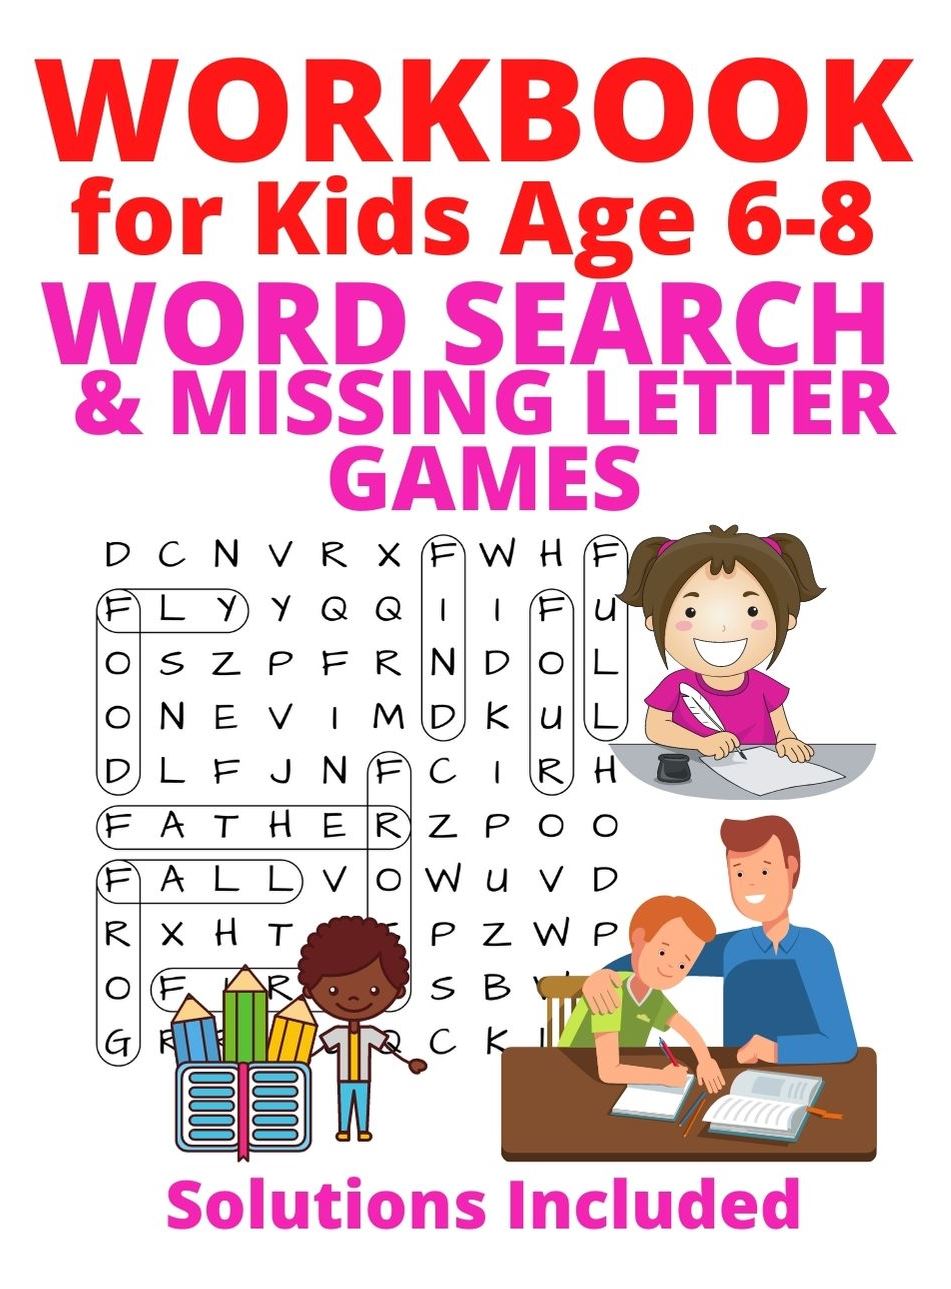 workbook-for-kids-age-6-8-word-search-and-missing-letter-games